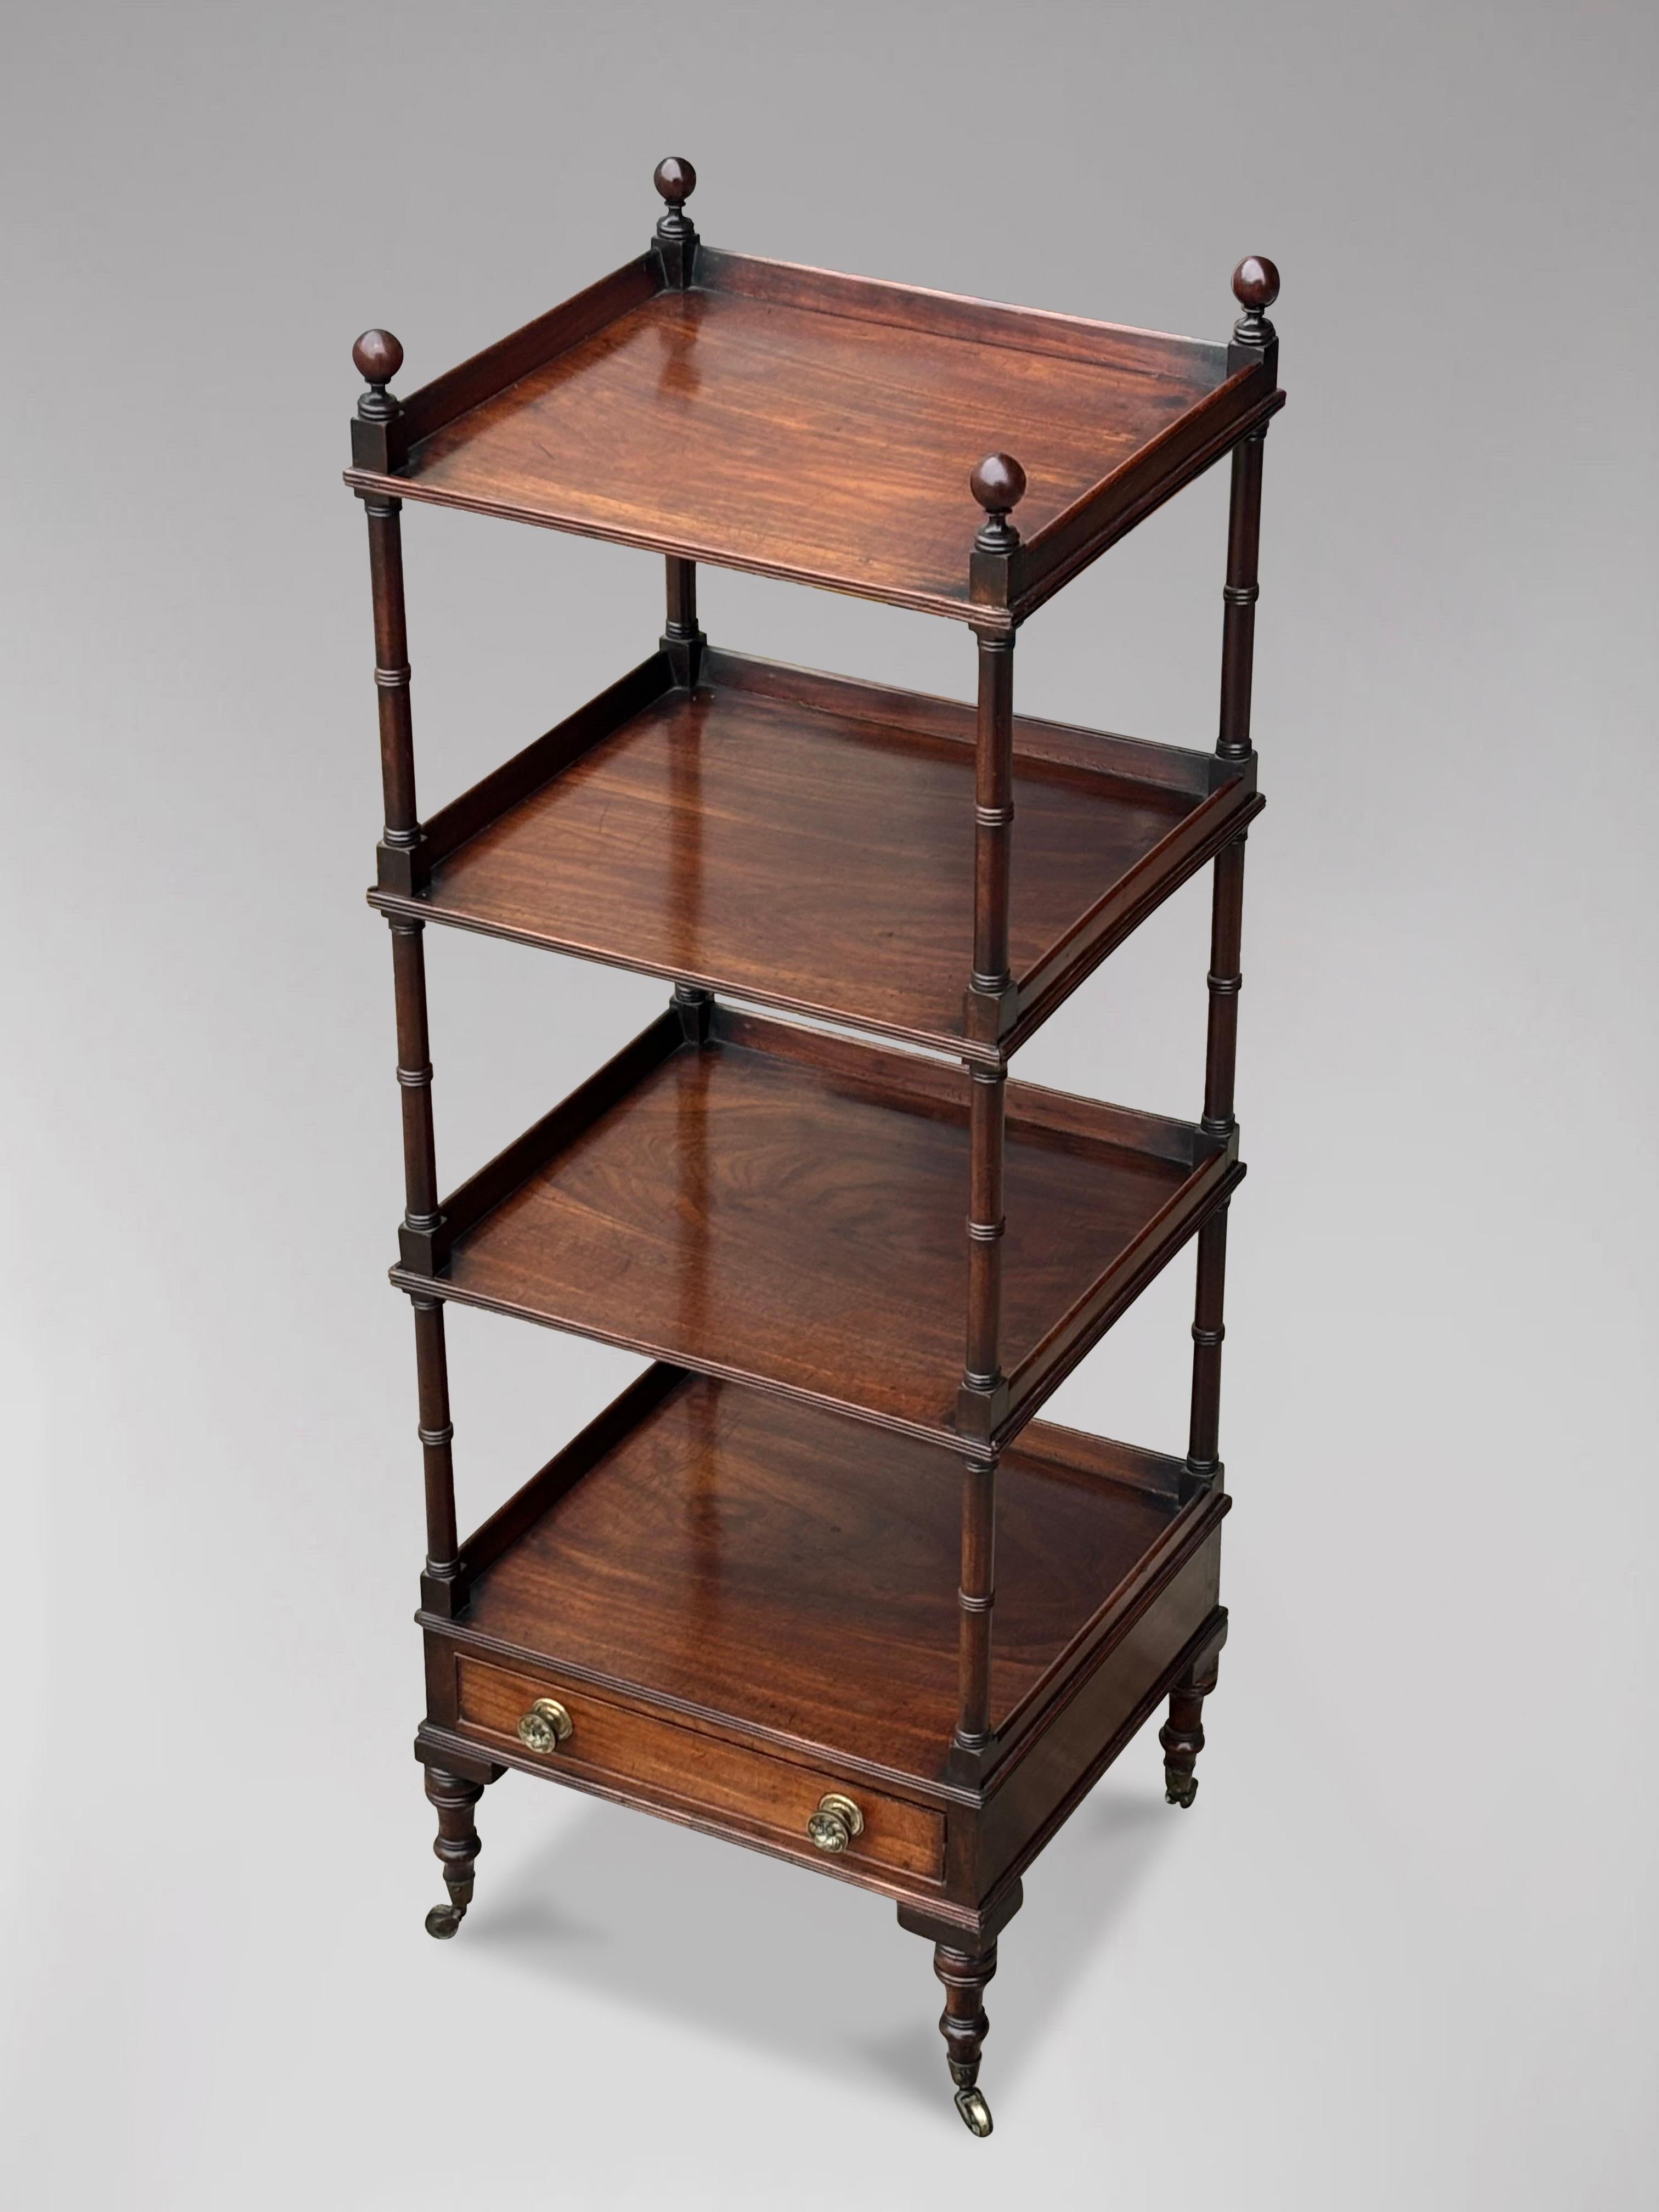 A fine quality early 19th century, Regency period mahogany whatnot. The rectangular top with a three-quarter gallery above four similar tiers, all in quality flame mahogany, over a cockbeaded drawer with turned brass knob handles, supported by